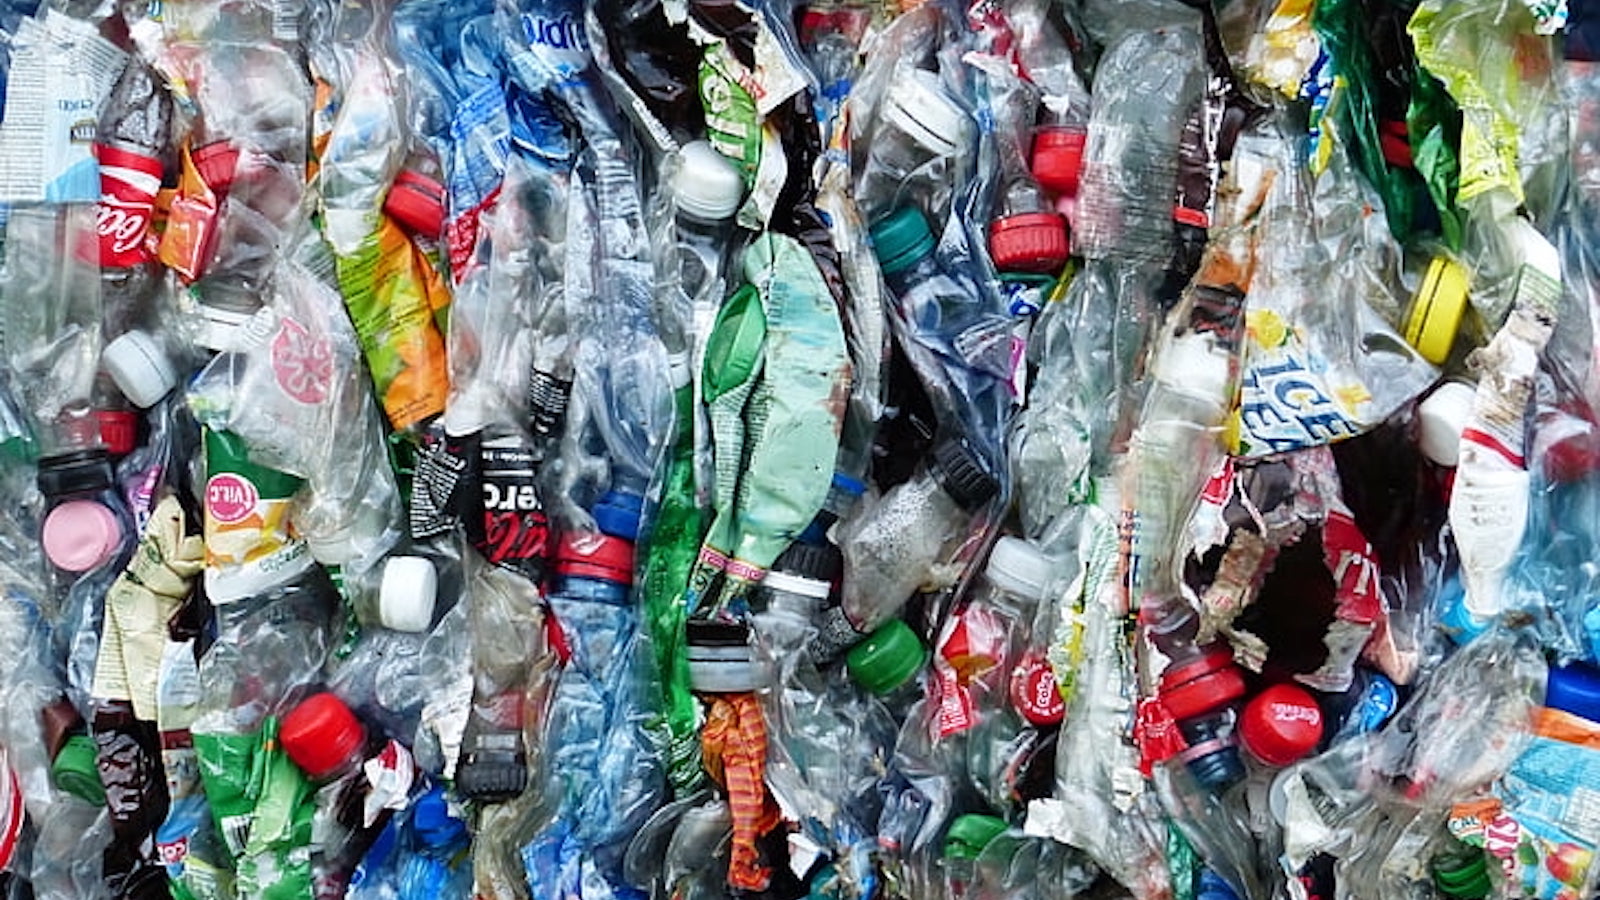 Frequently asked questions about recycling plastics